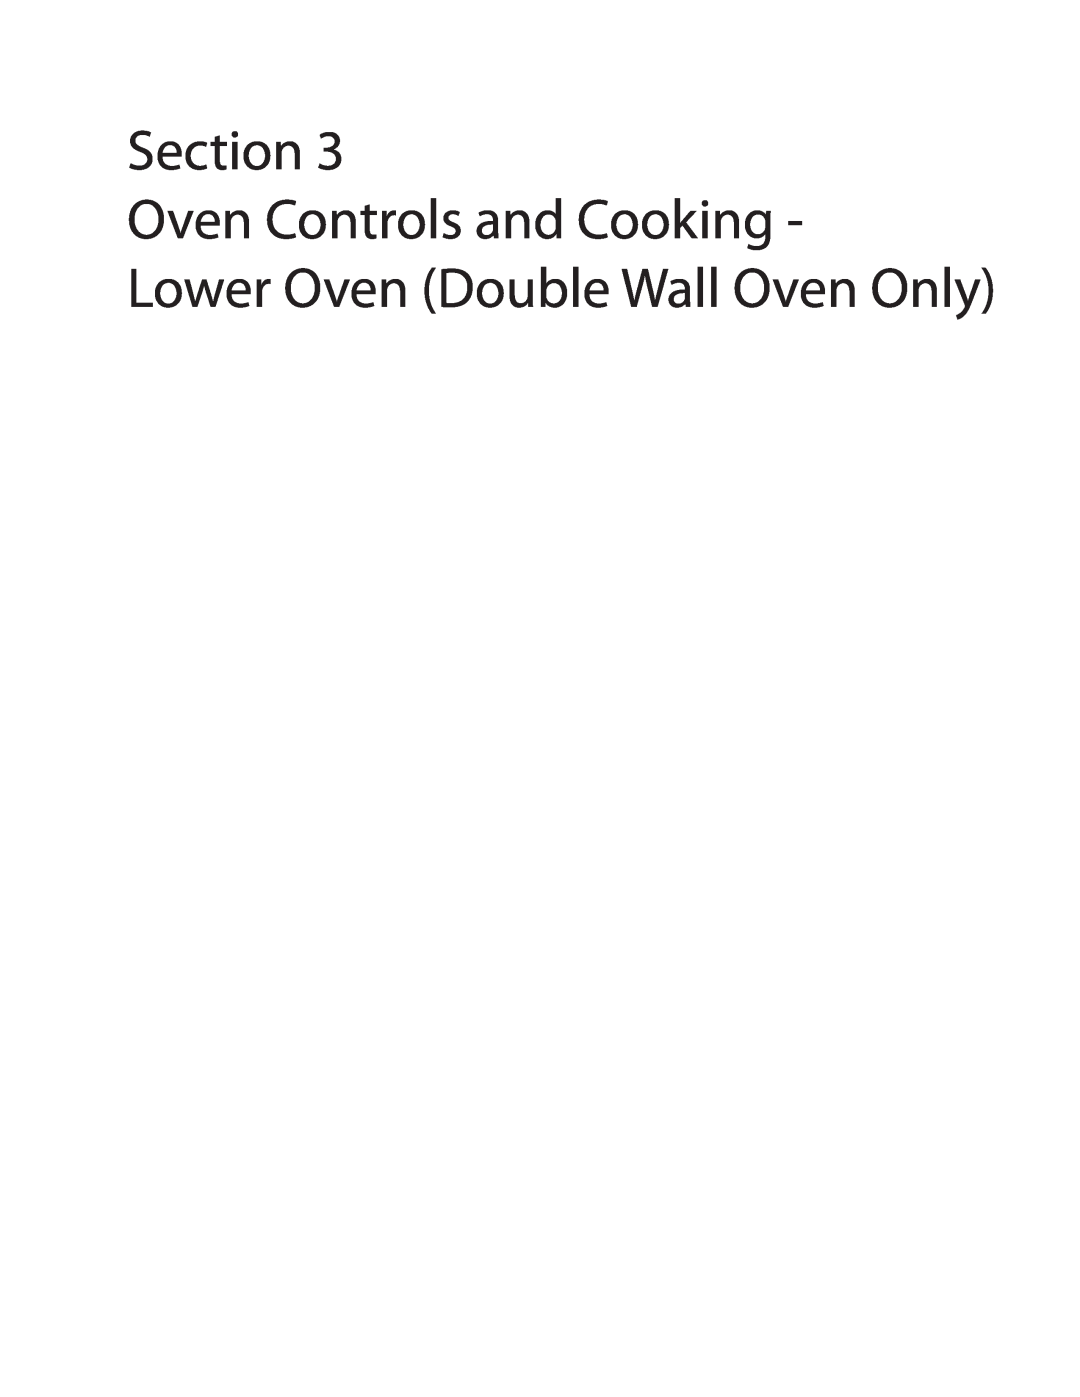 Turbo Chef Technologies Residential Single and Double Wall Oven service manual Section Oven Controls and Cooking 